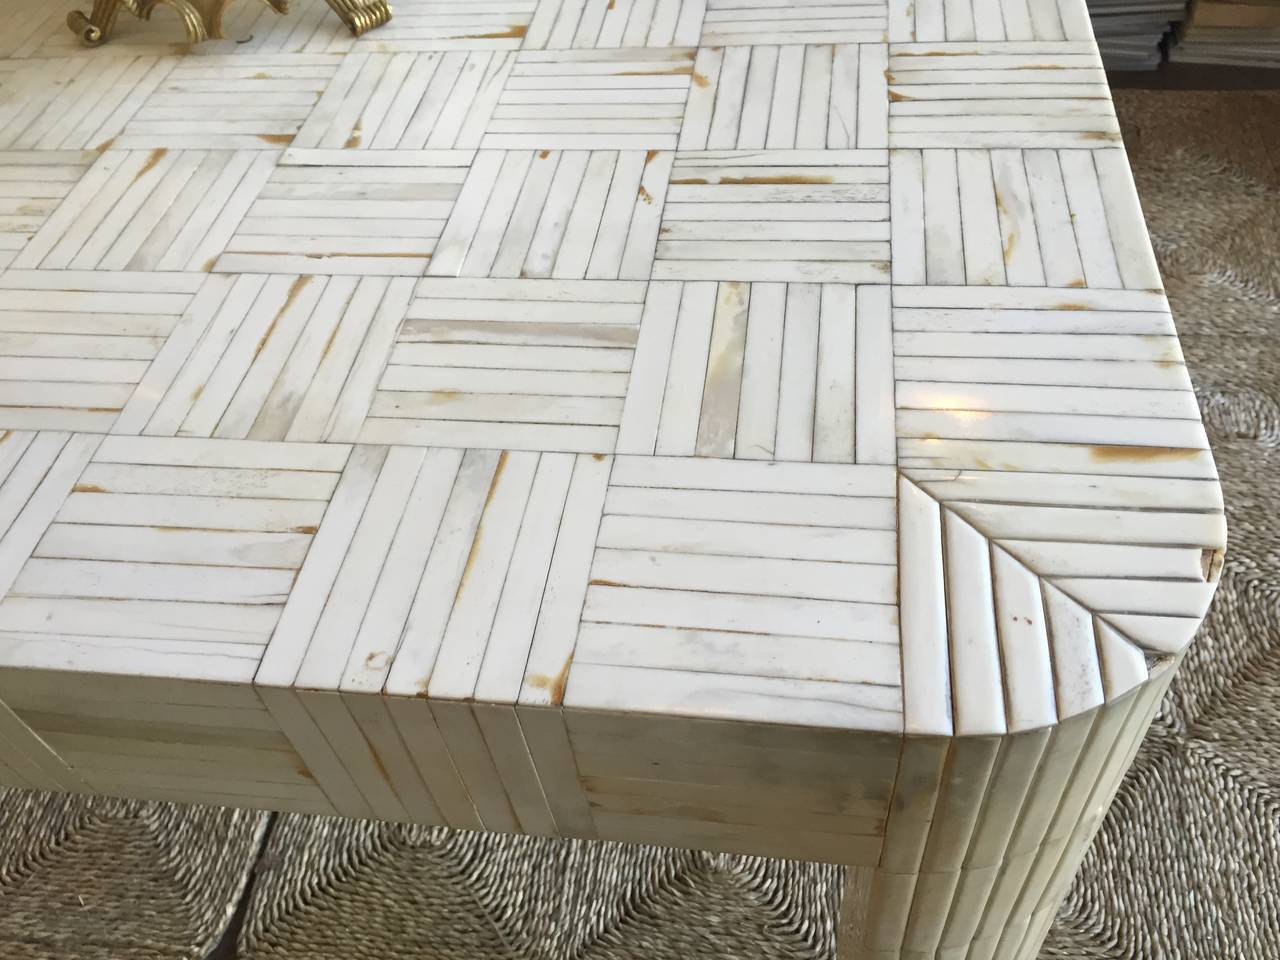 20th Century Karl Springer Style Table with Tessellated Polished Bone Tiles